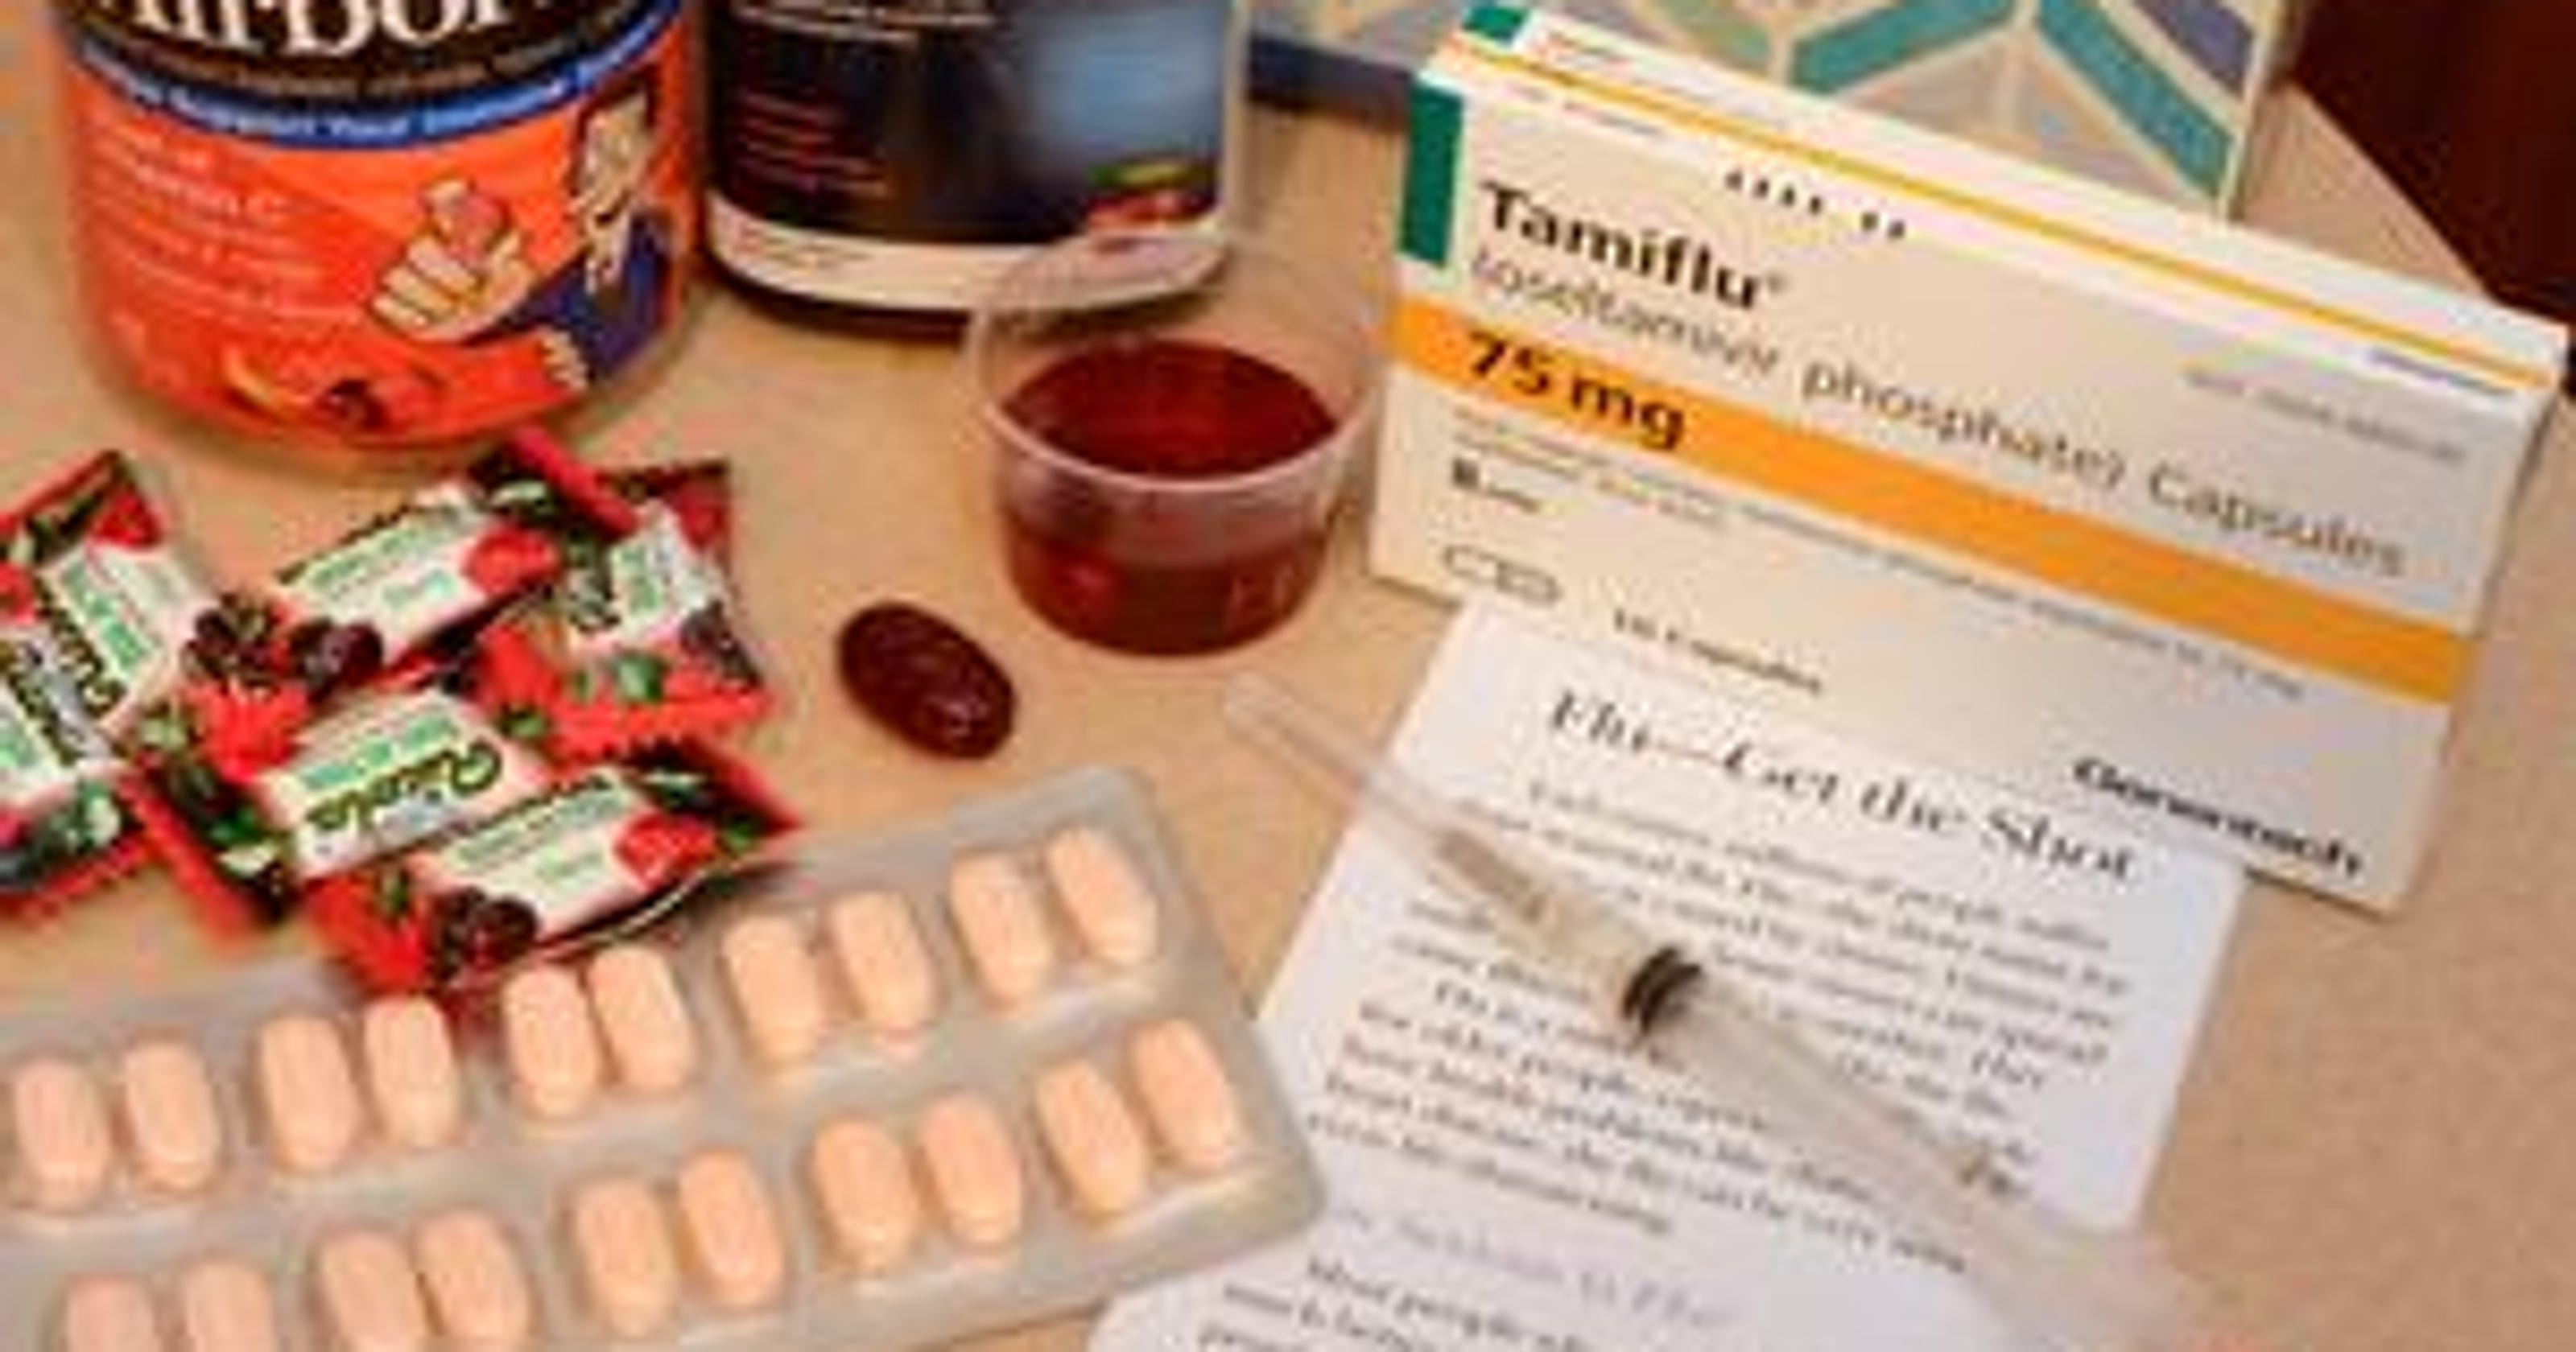 tamiflu-side-effects-may-be-odd-particularly-in-kids-experts-say